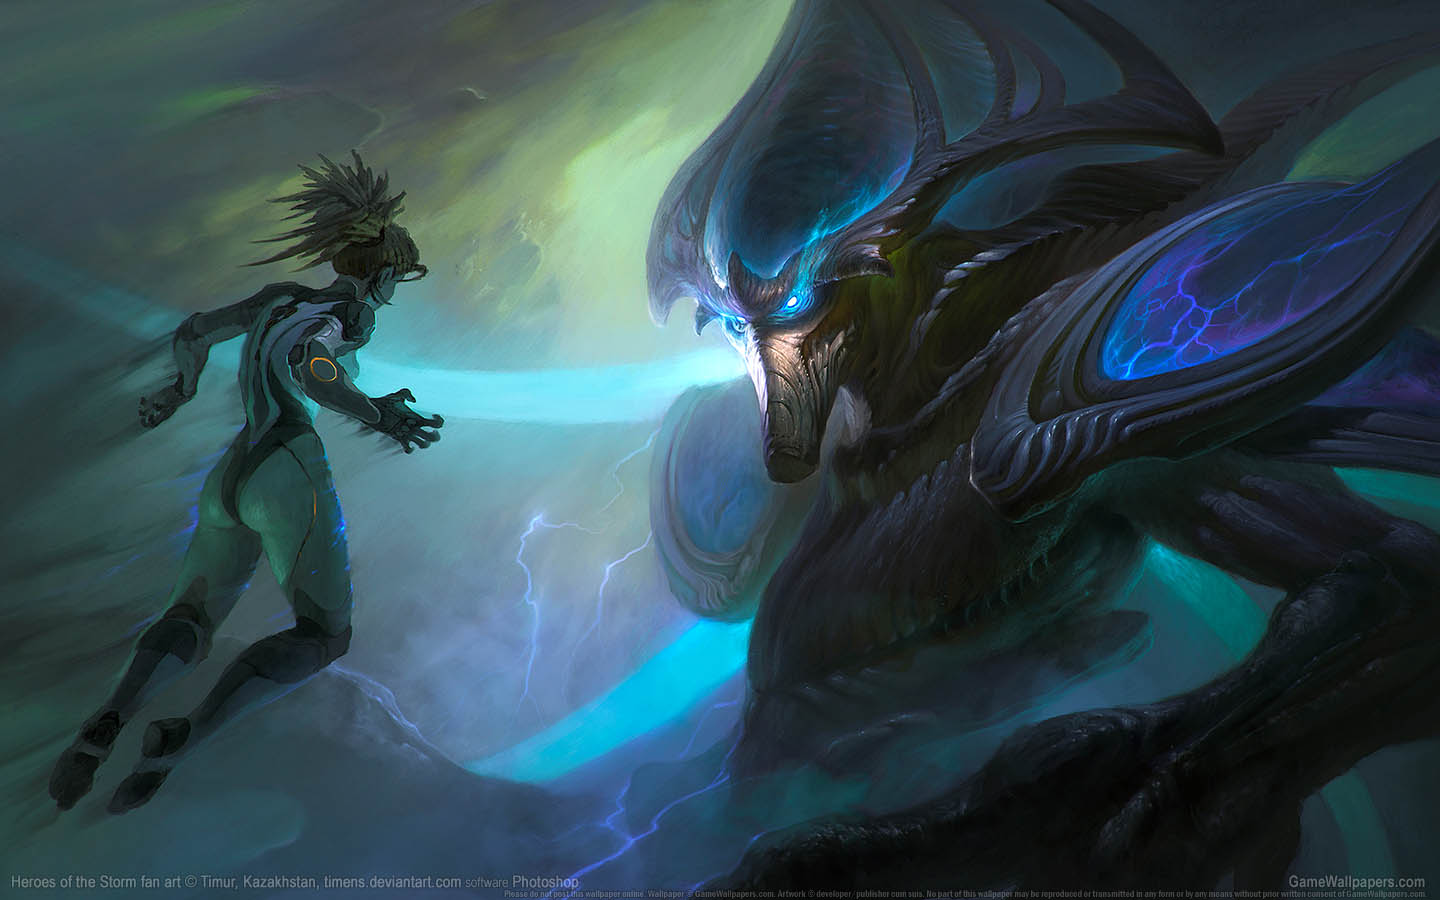 Heroes of the Storm fan art achtergrond 09 1440x900